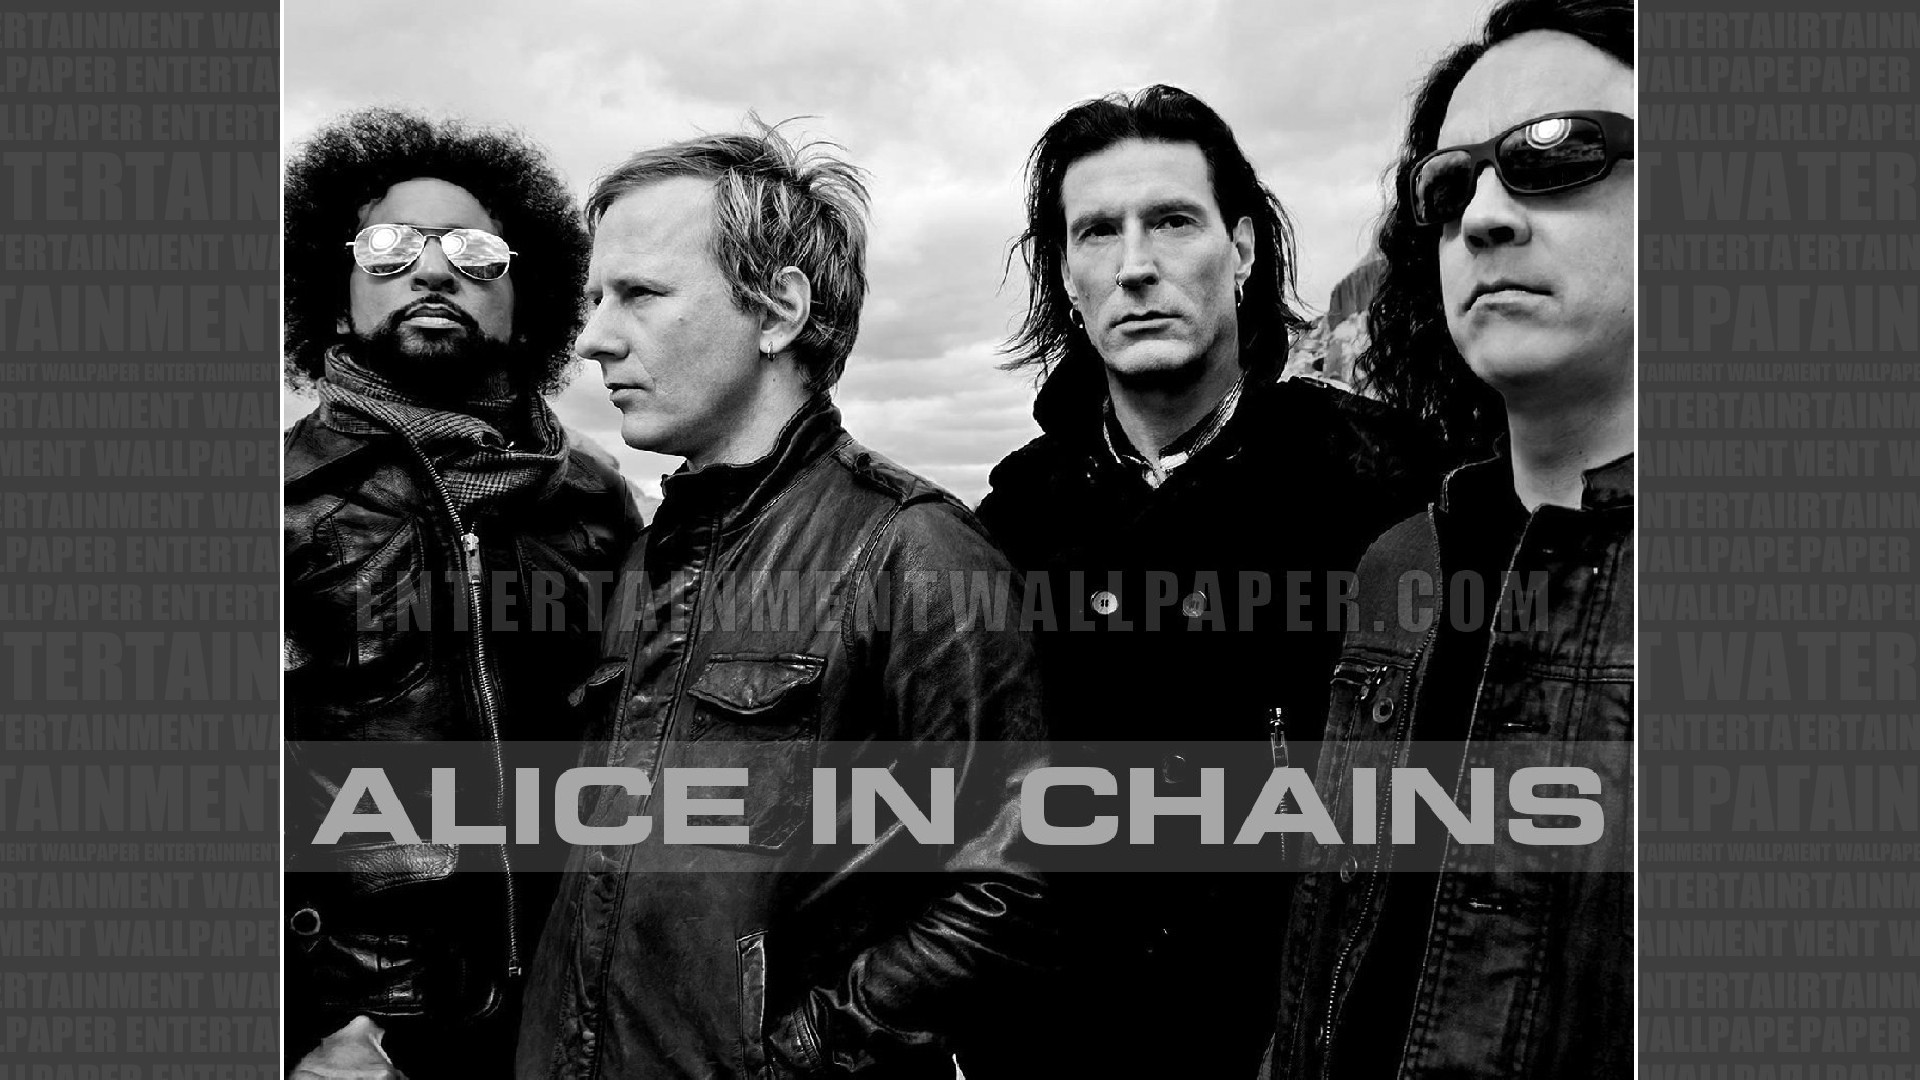 Alice in Chains Wallpapers.